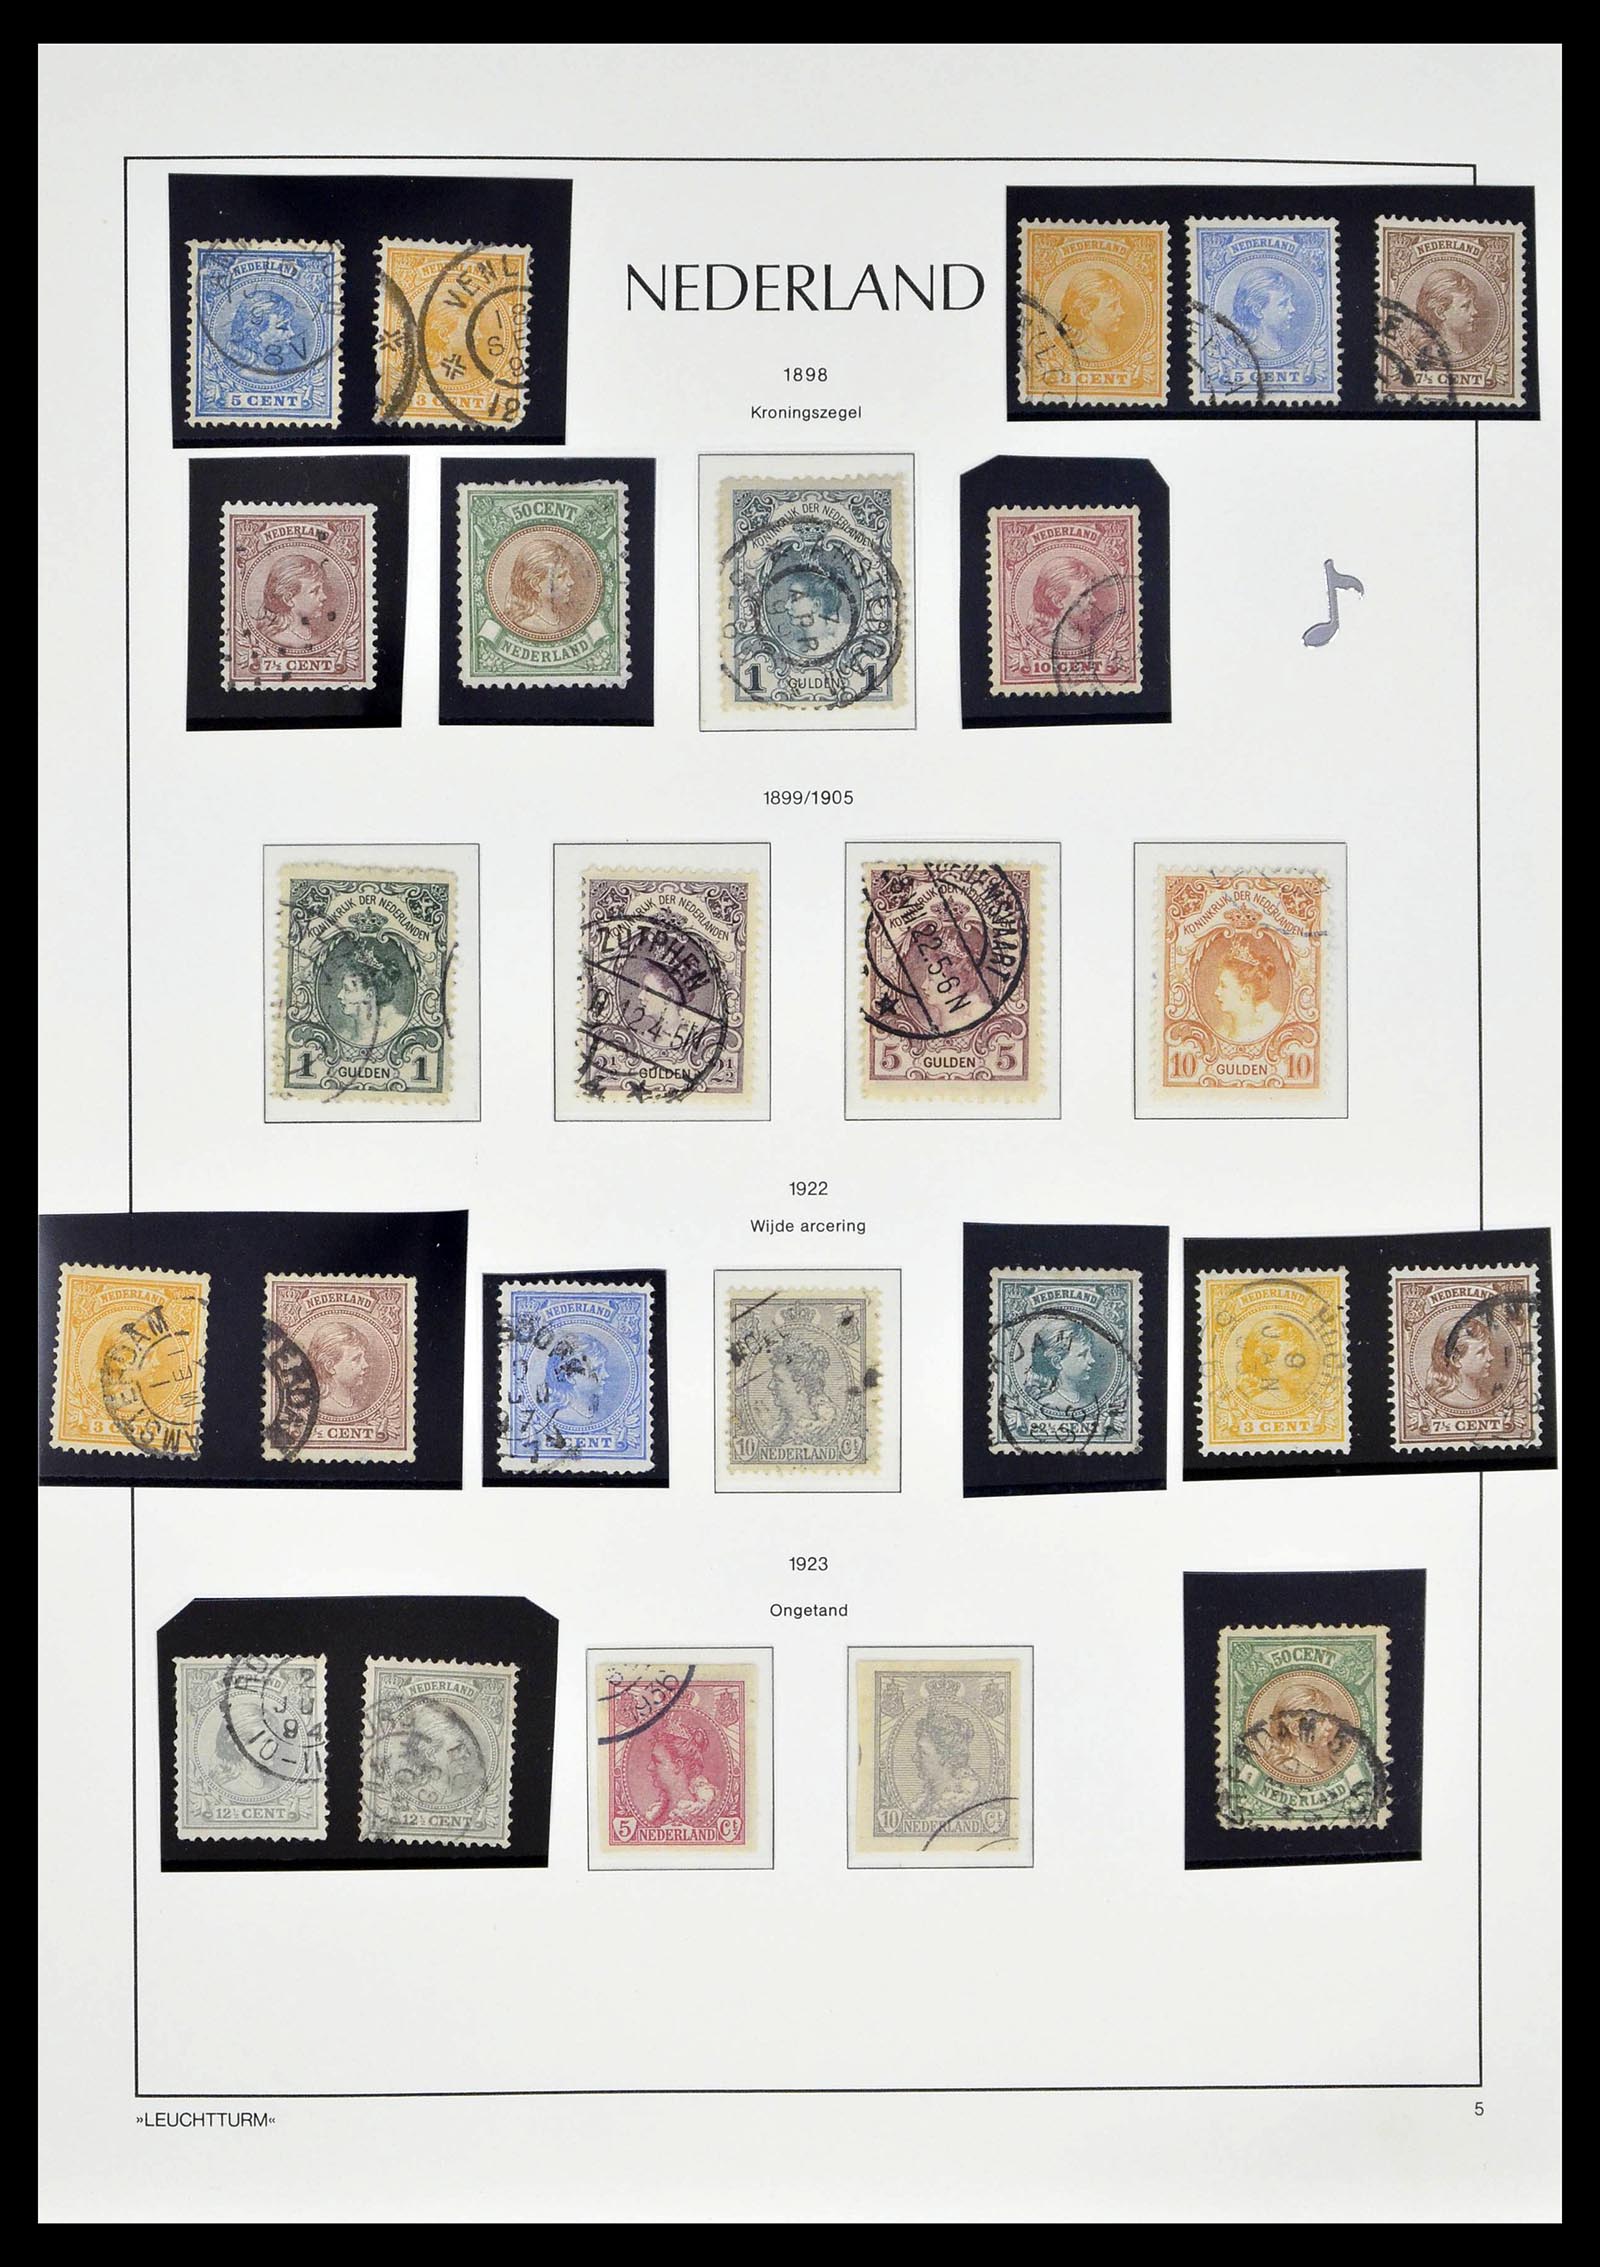 39135 0008 - Stamp collection 39135 Netherlands 1852-1969.